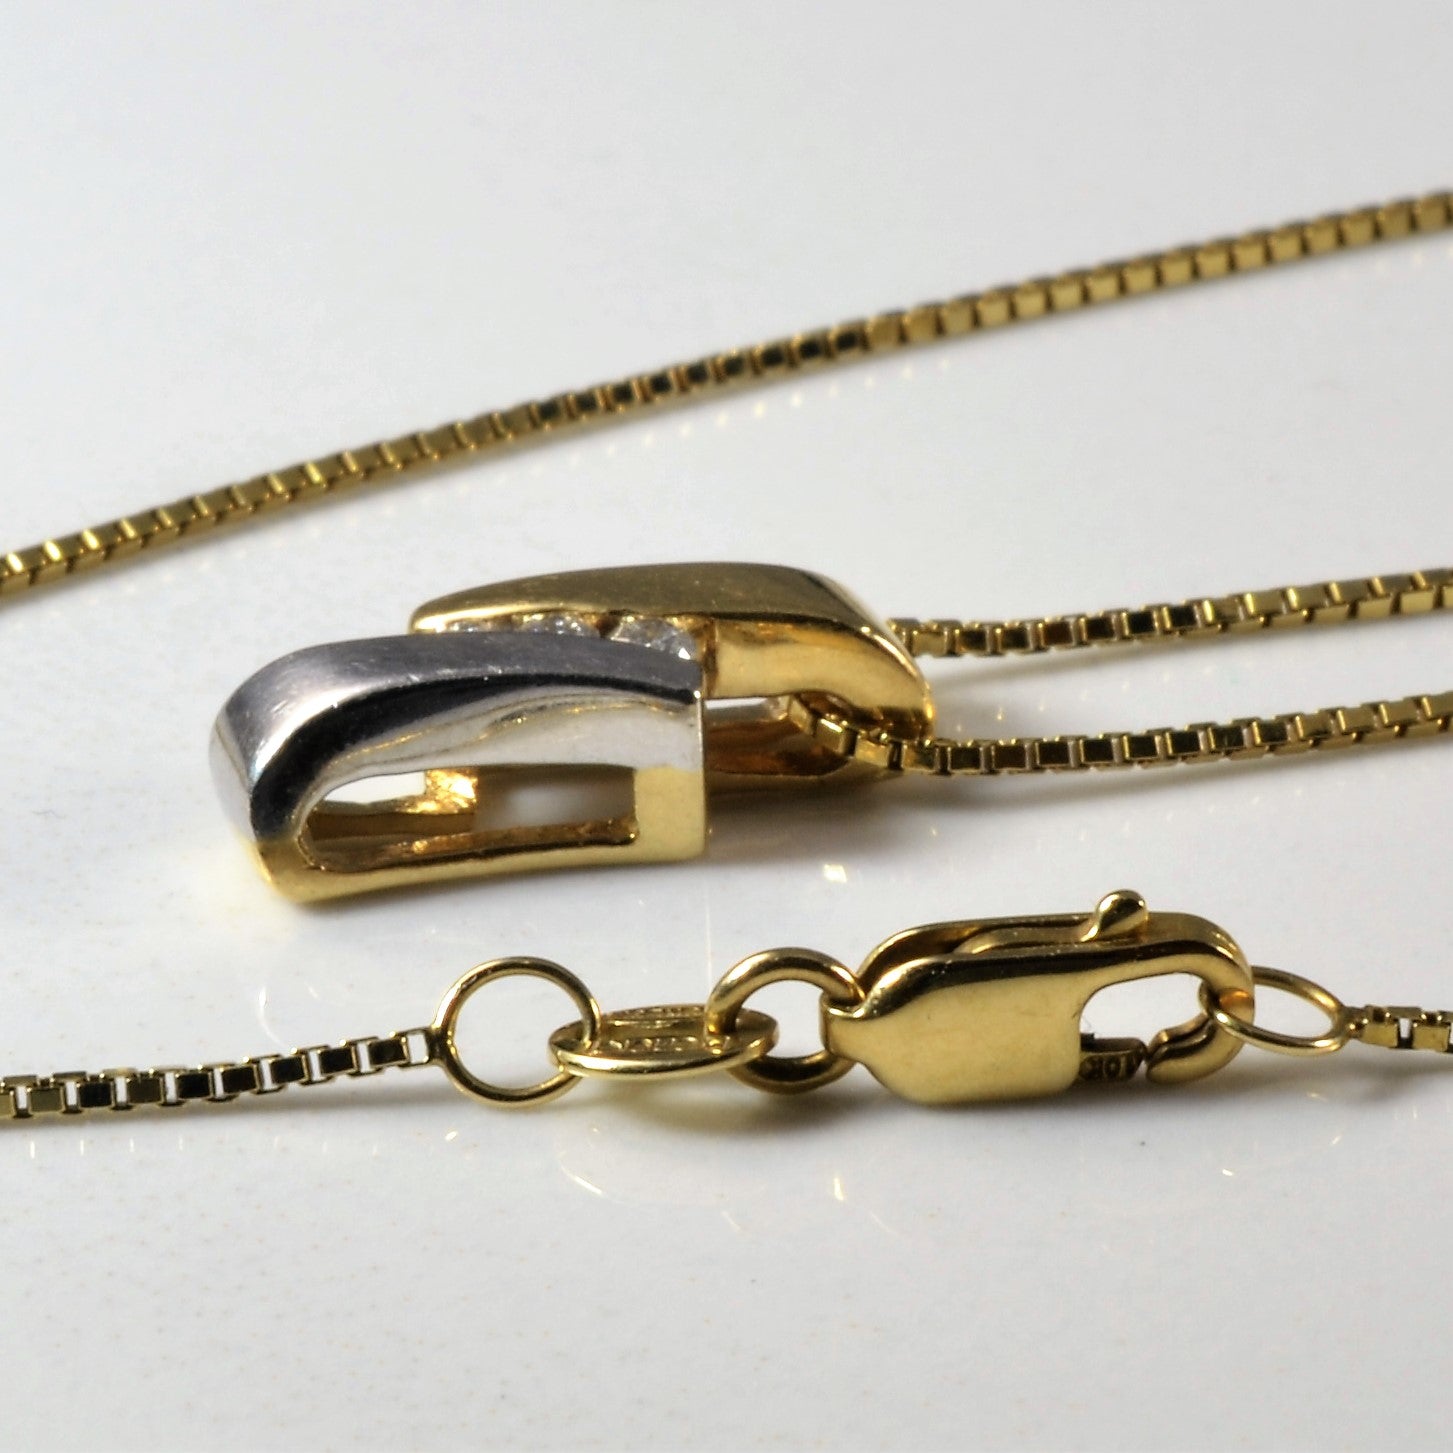 Channel Diamond Two Tone Necklace | 0.06ctw | 20